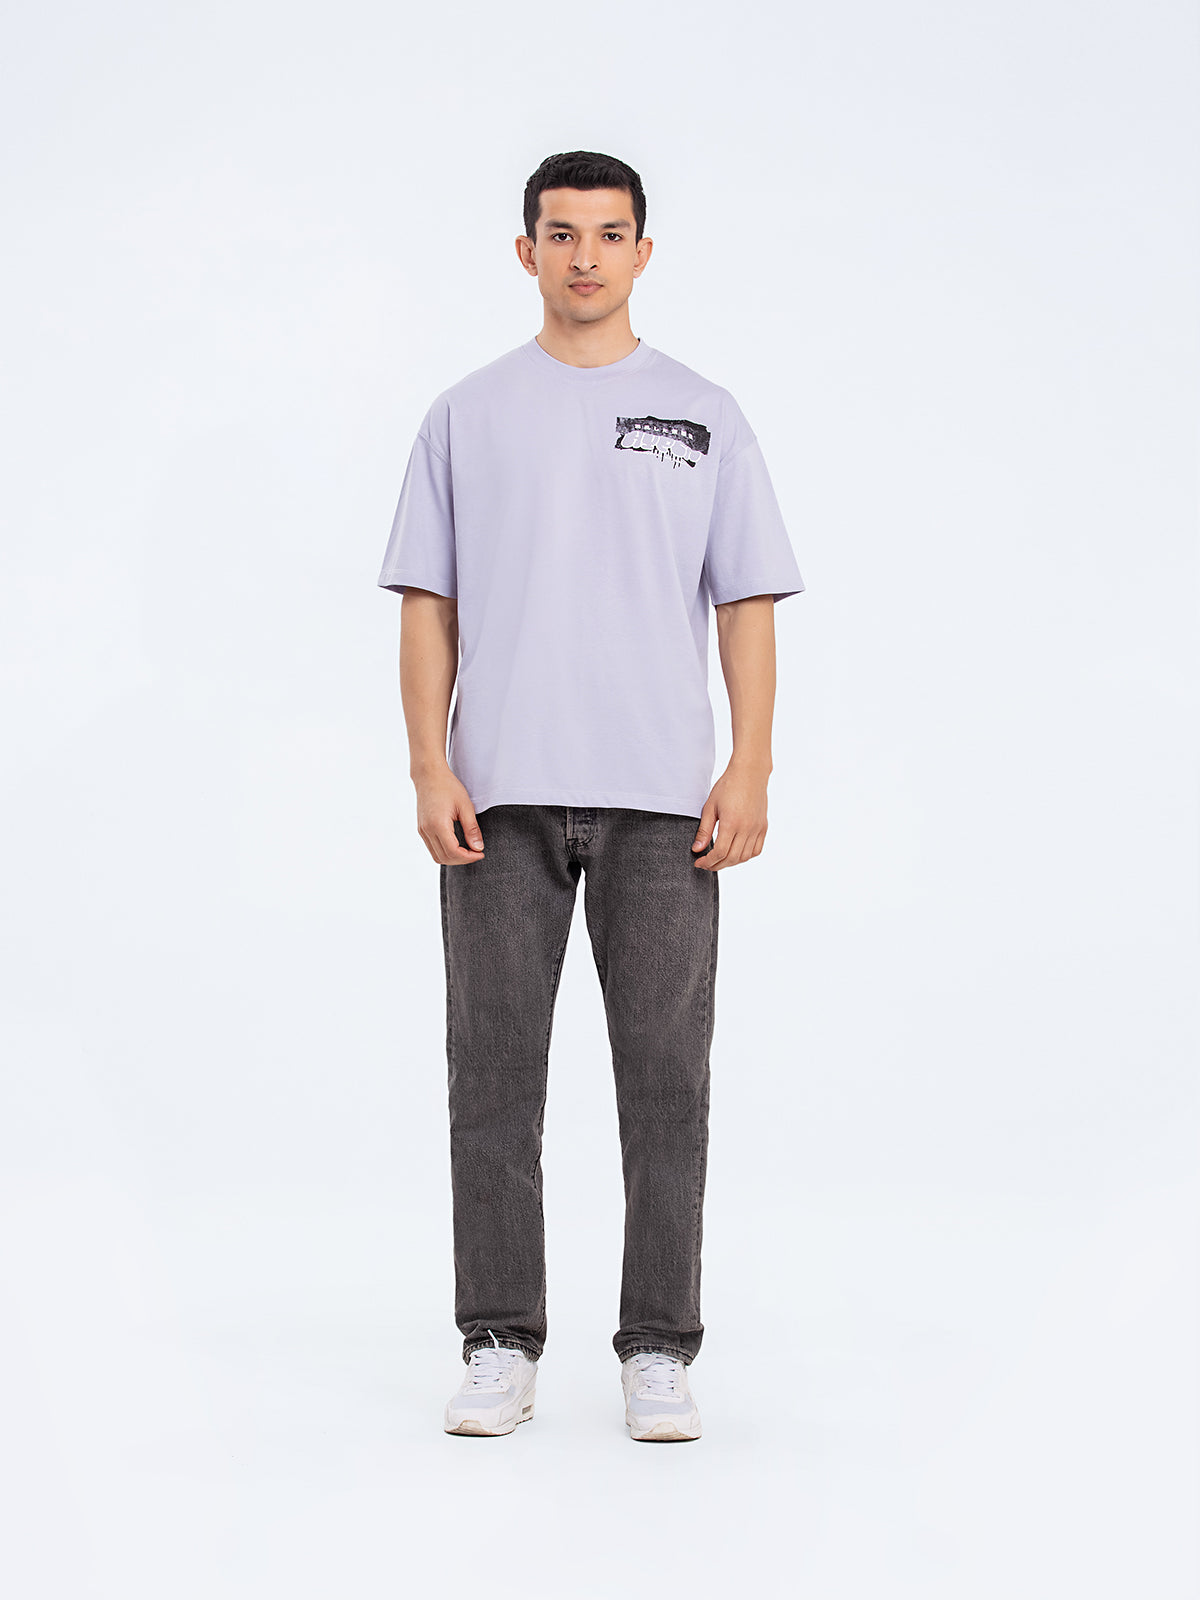 Relaxed Fit Graphic Tee - FMTGT24-025